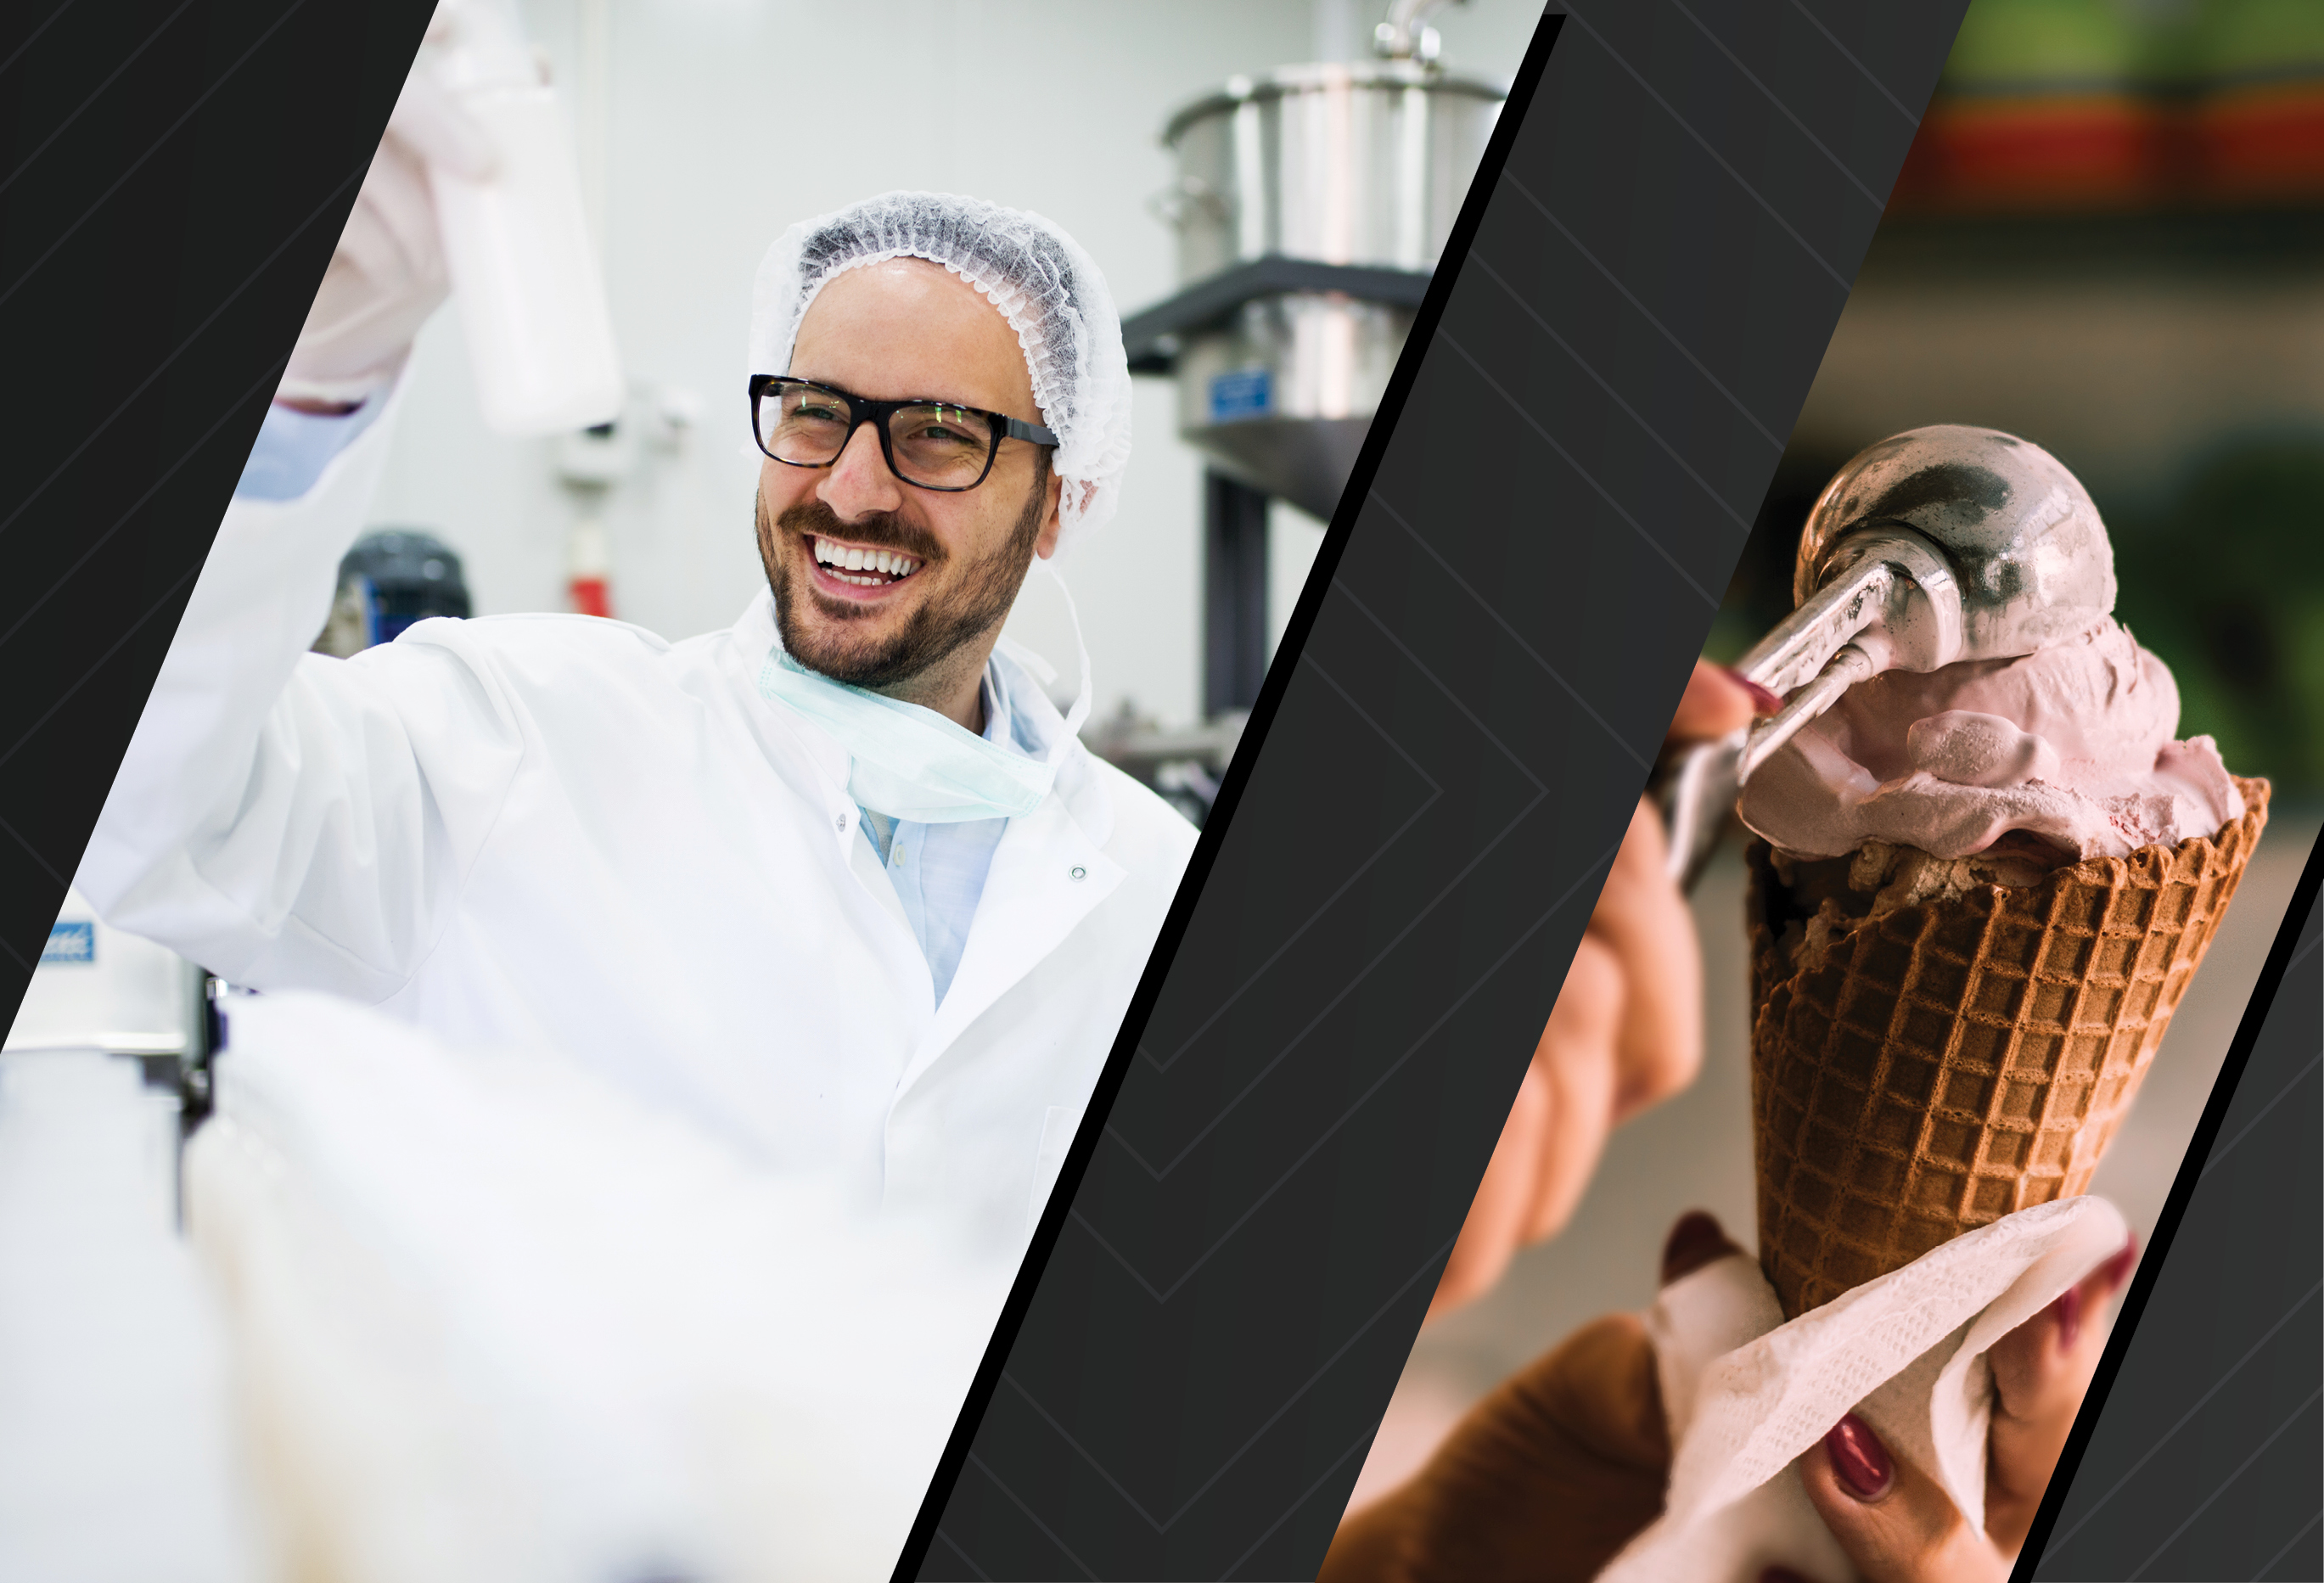 Left image of dairy researcher in the lab. Right image of freshly scooped ice cream cone. Both images courtesy of Adobe Stock.